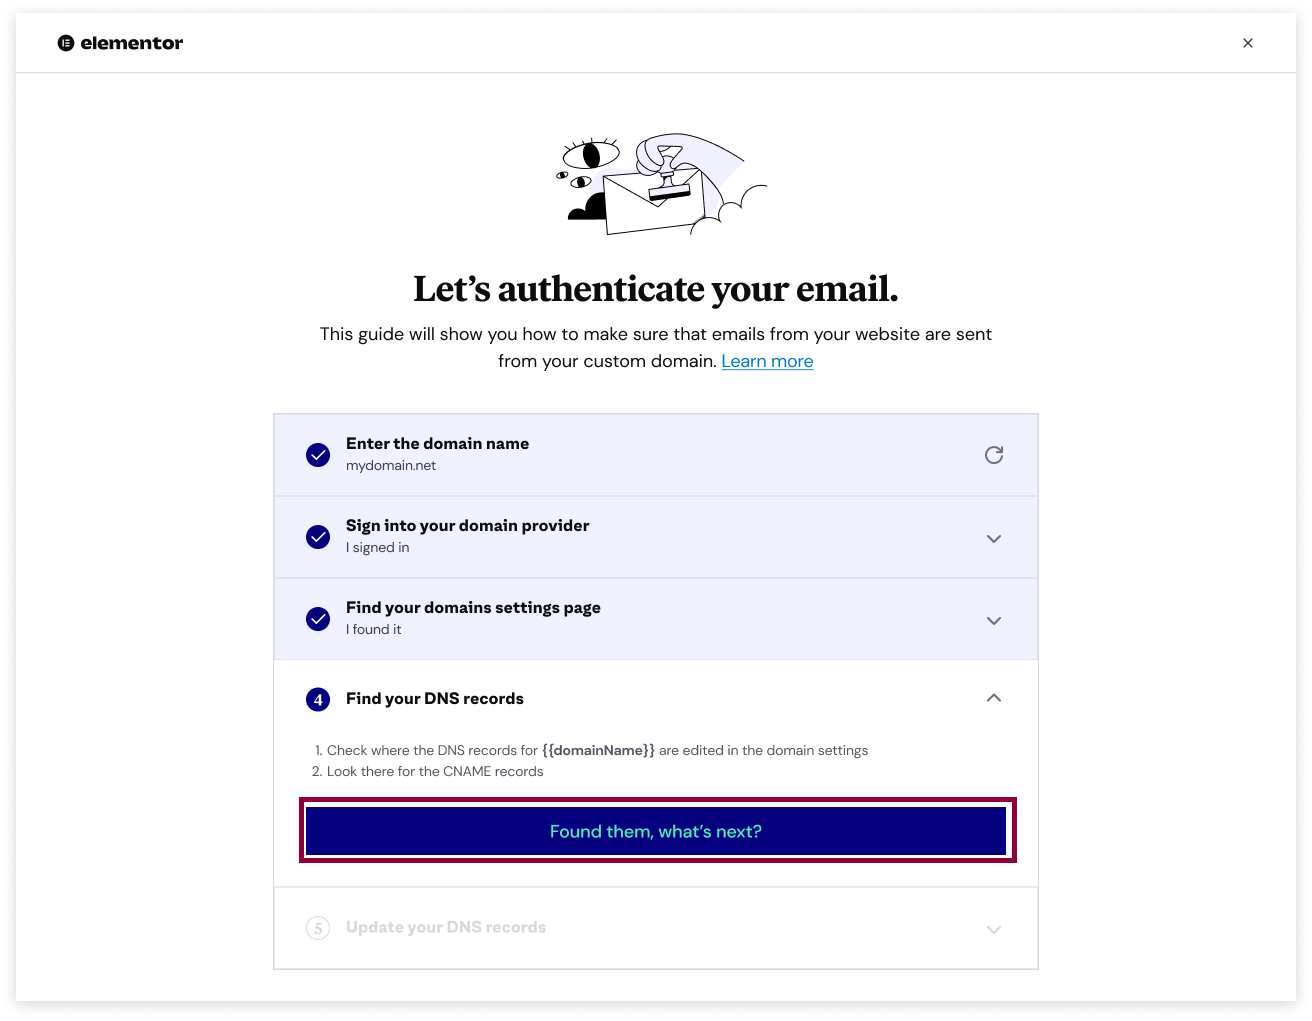 The find your DNS records modal of the email authentication process.